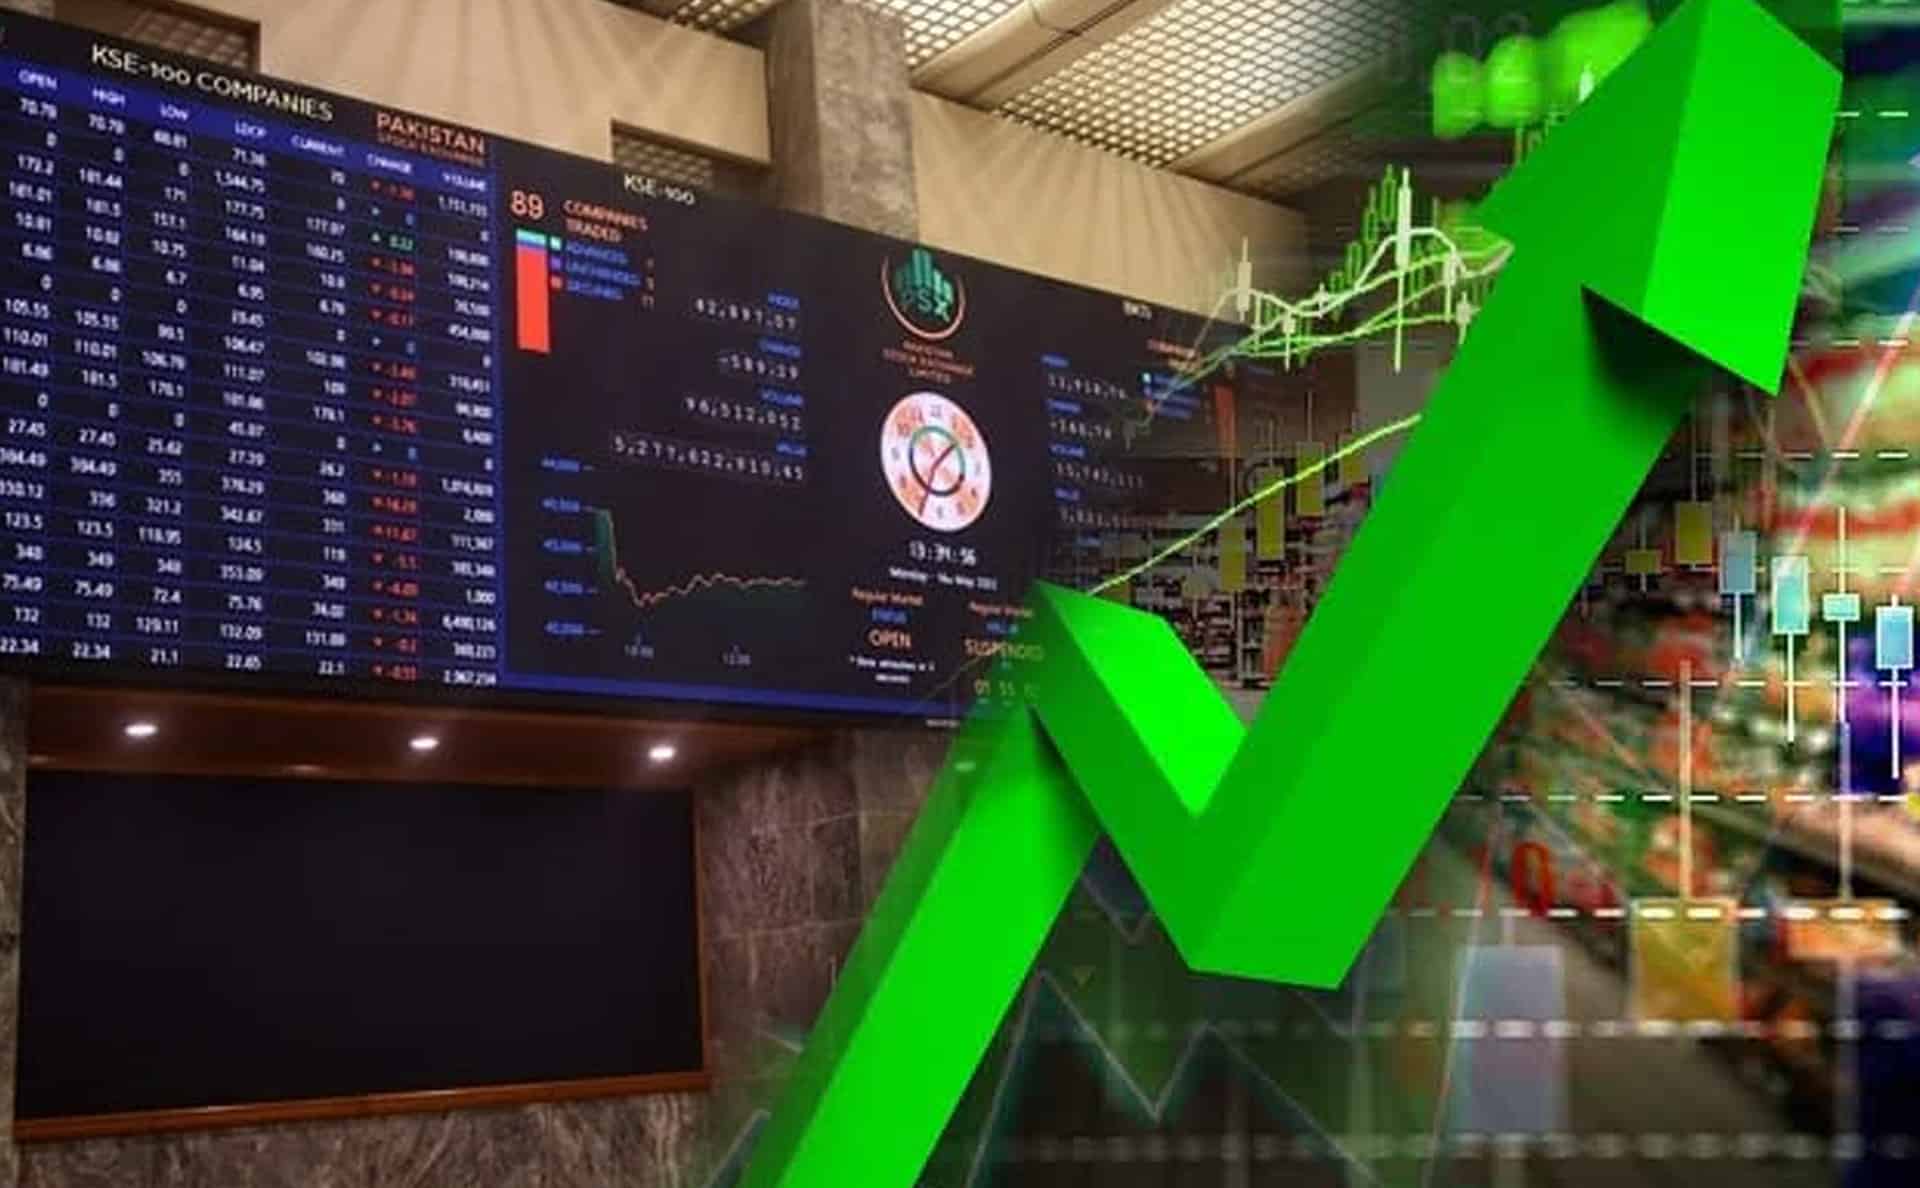 PSX Surges as IMF Approval Boosts KSE-100 by Nearly 700 Points